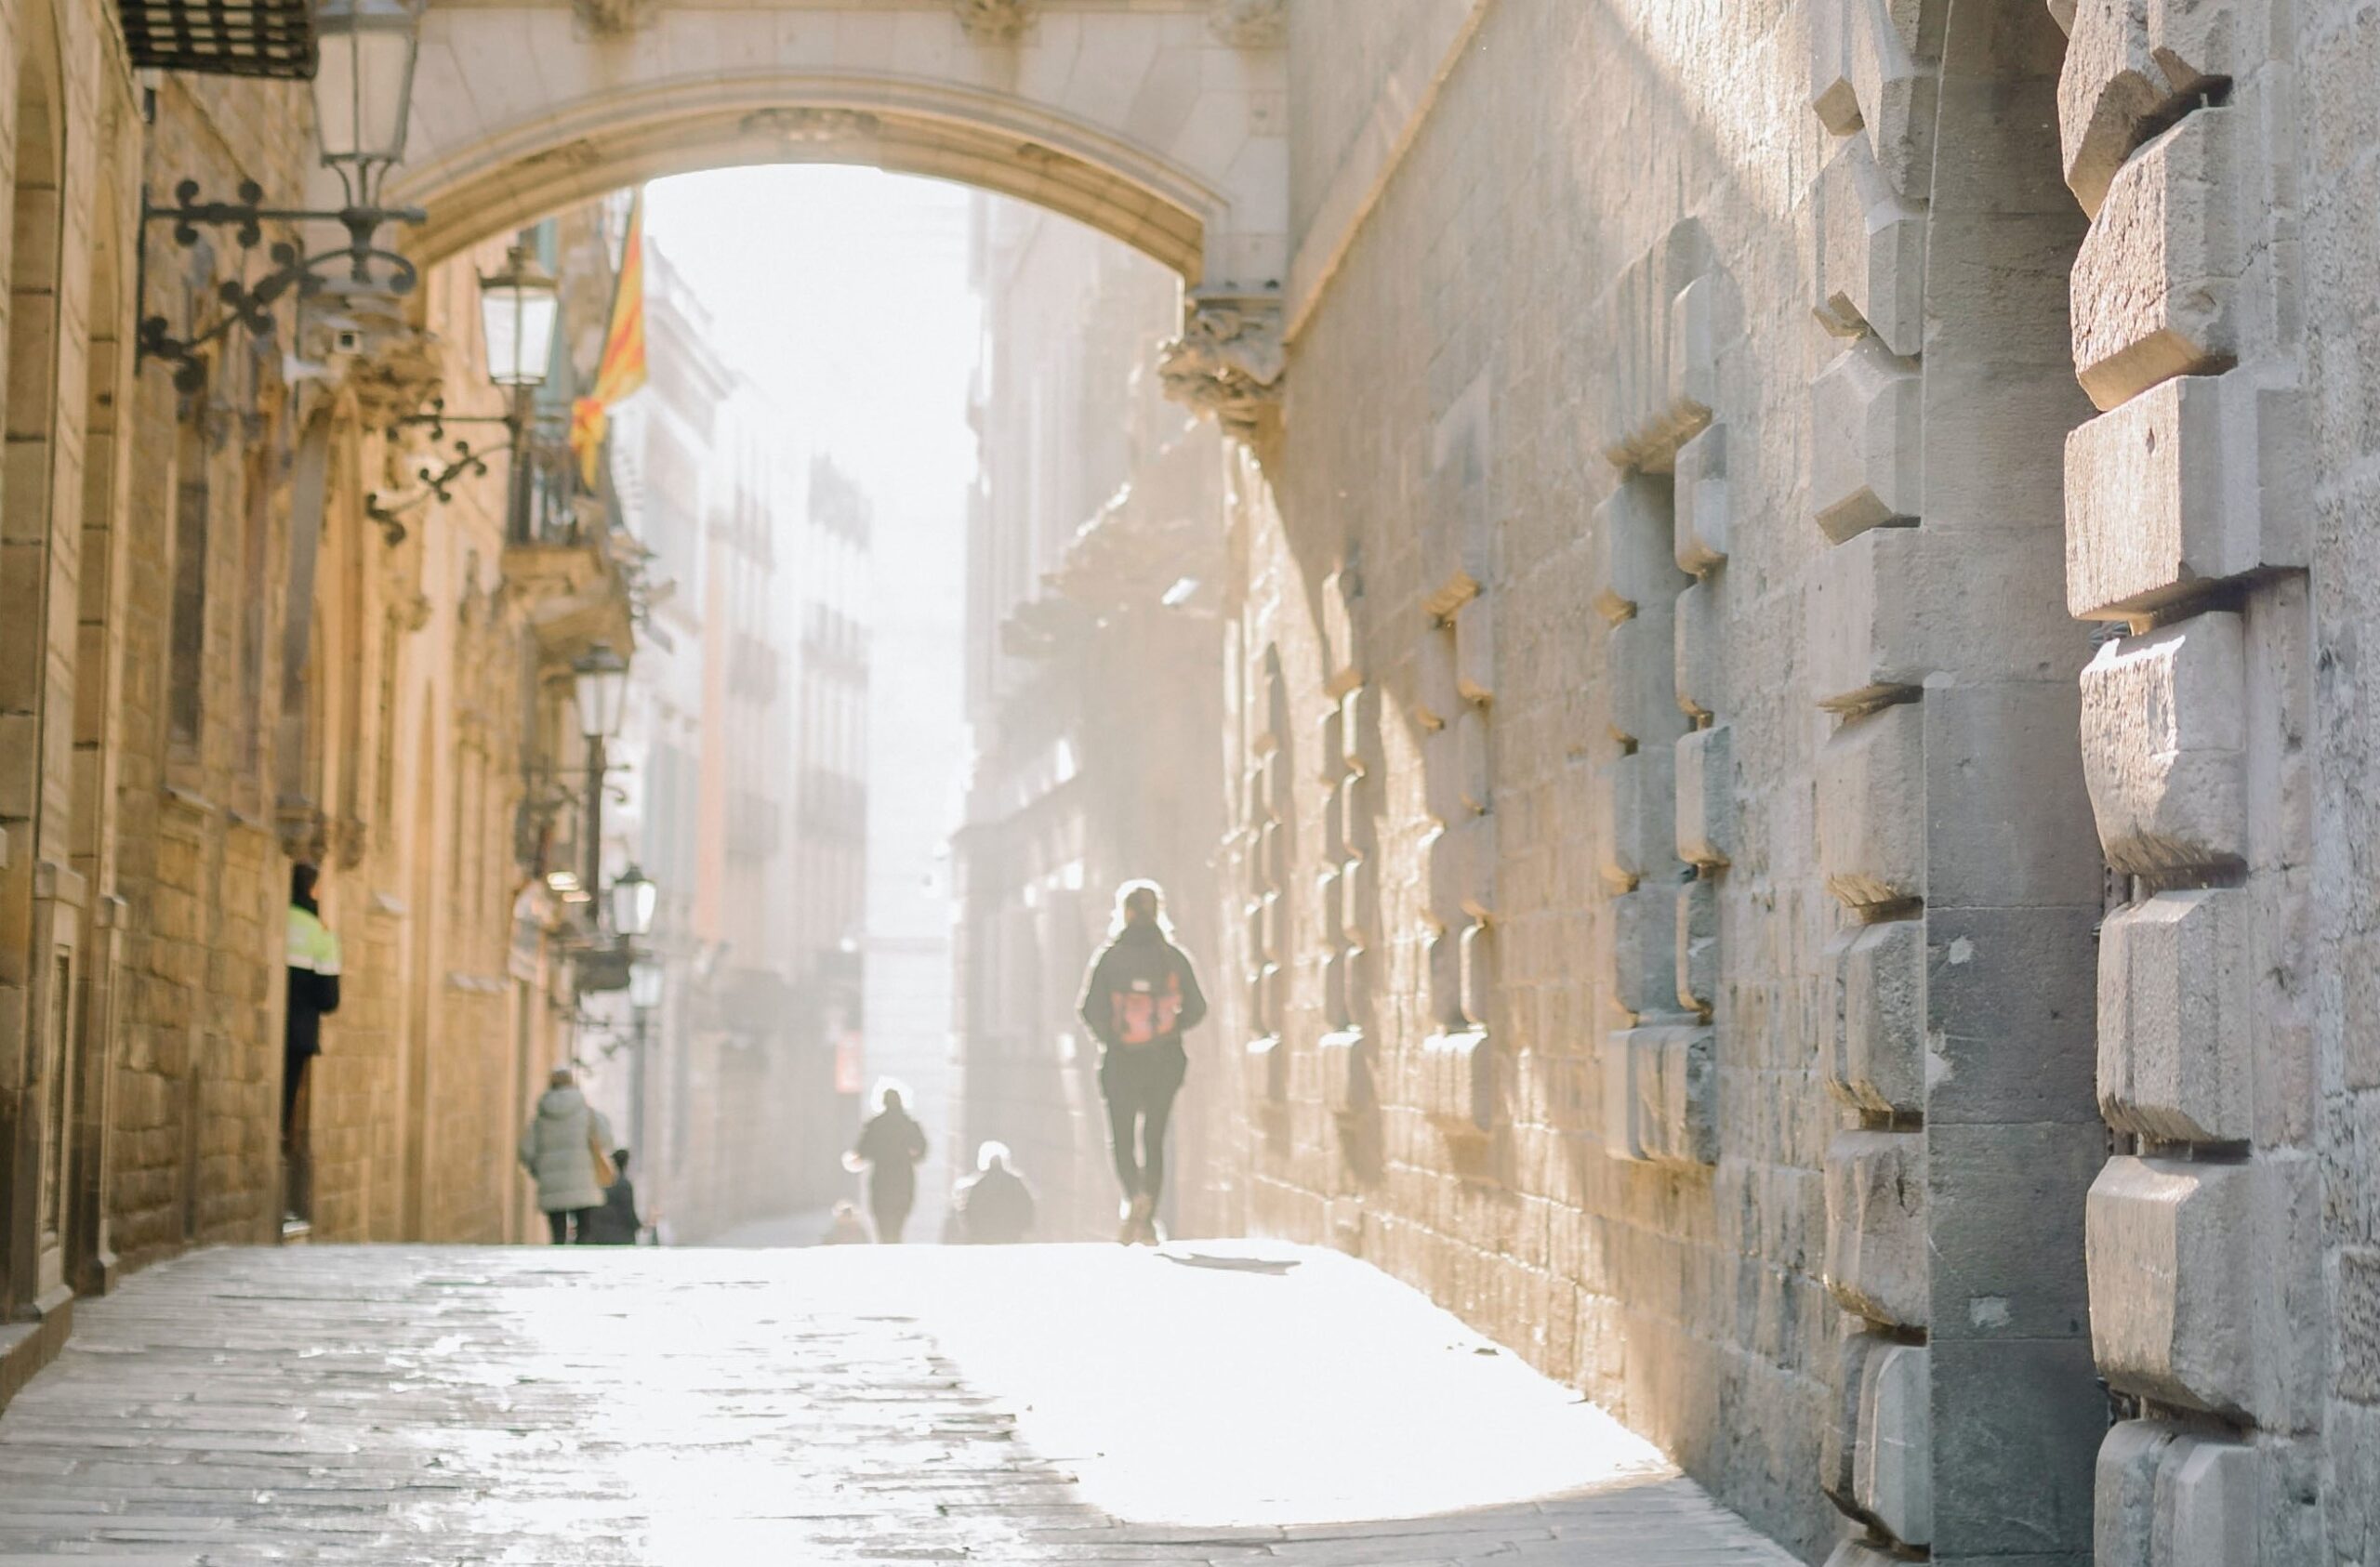 Sun beams into a historic Spanish street as people walk in the distance.